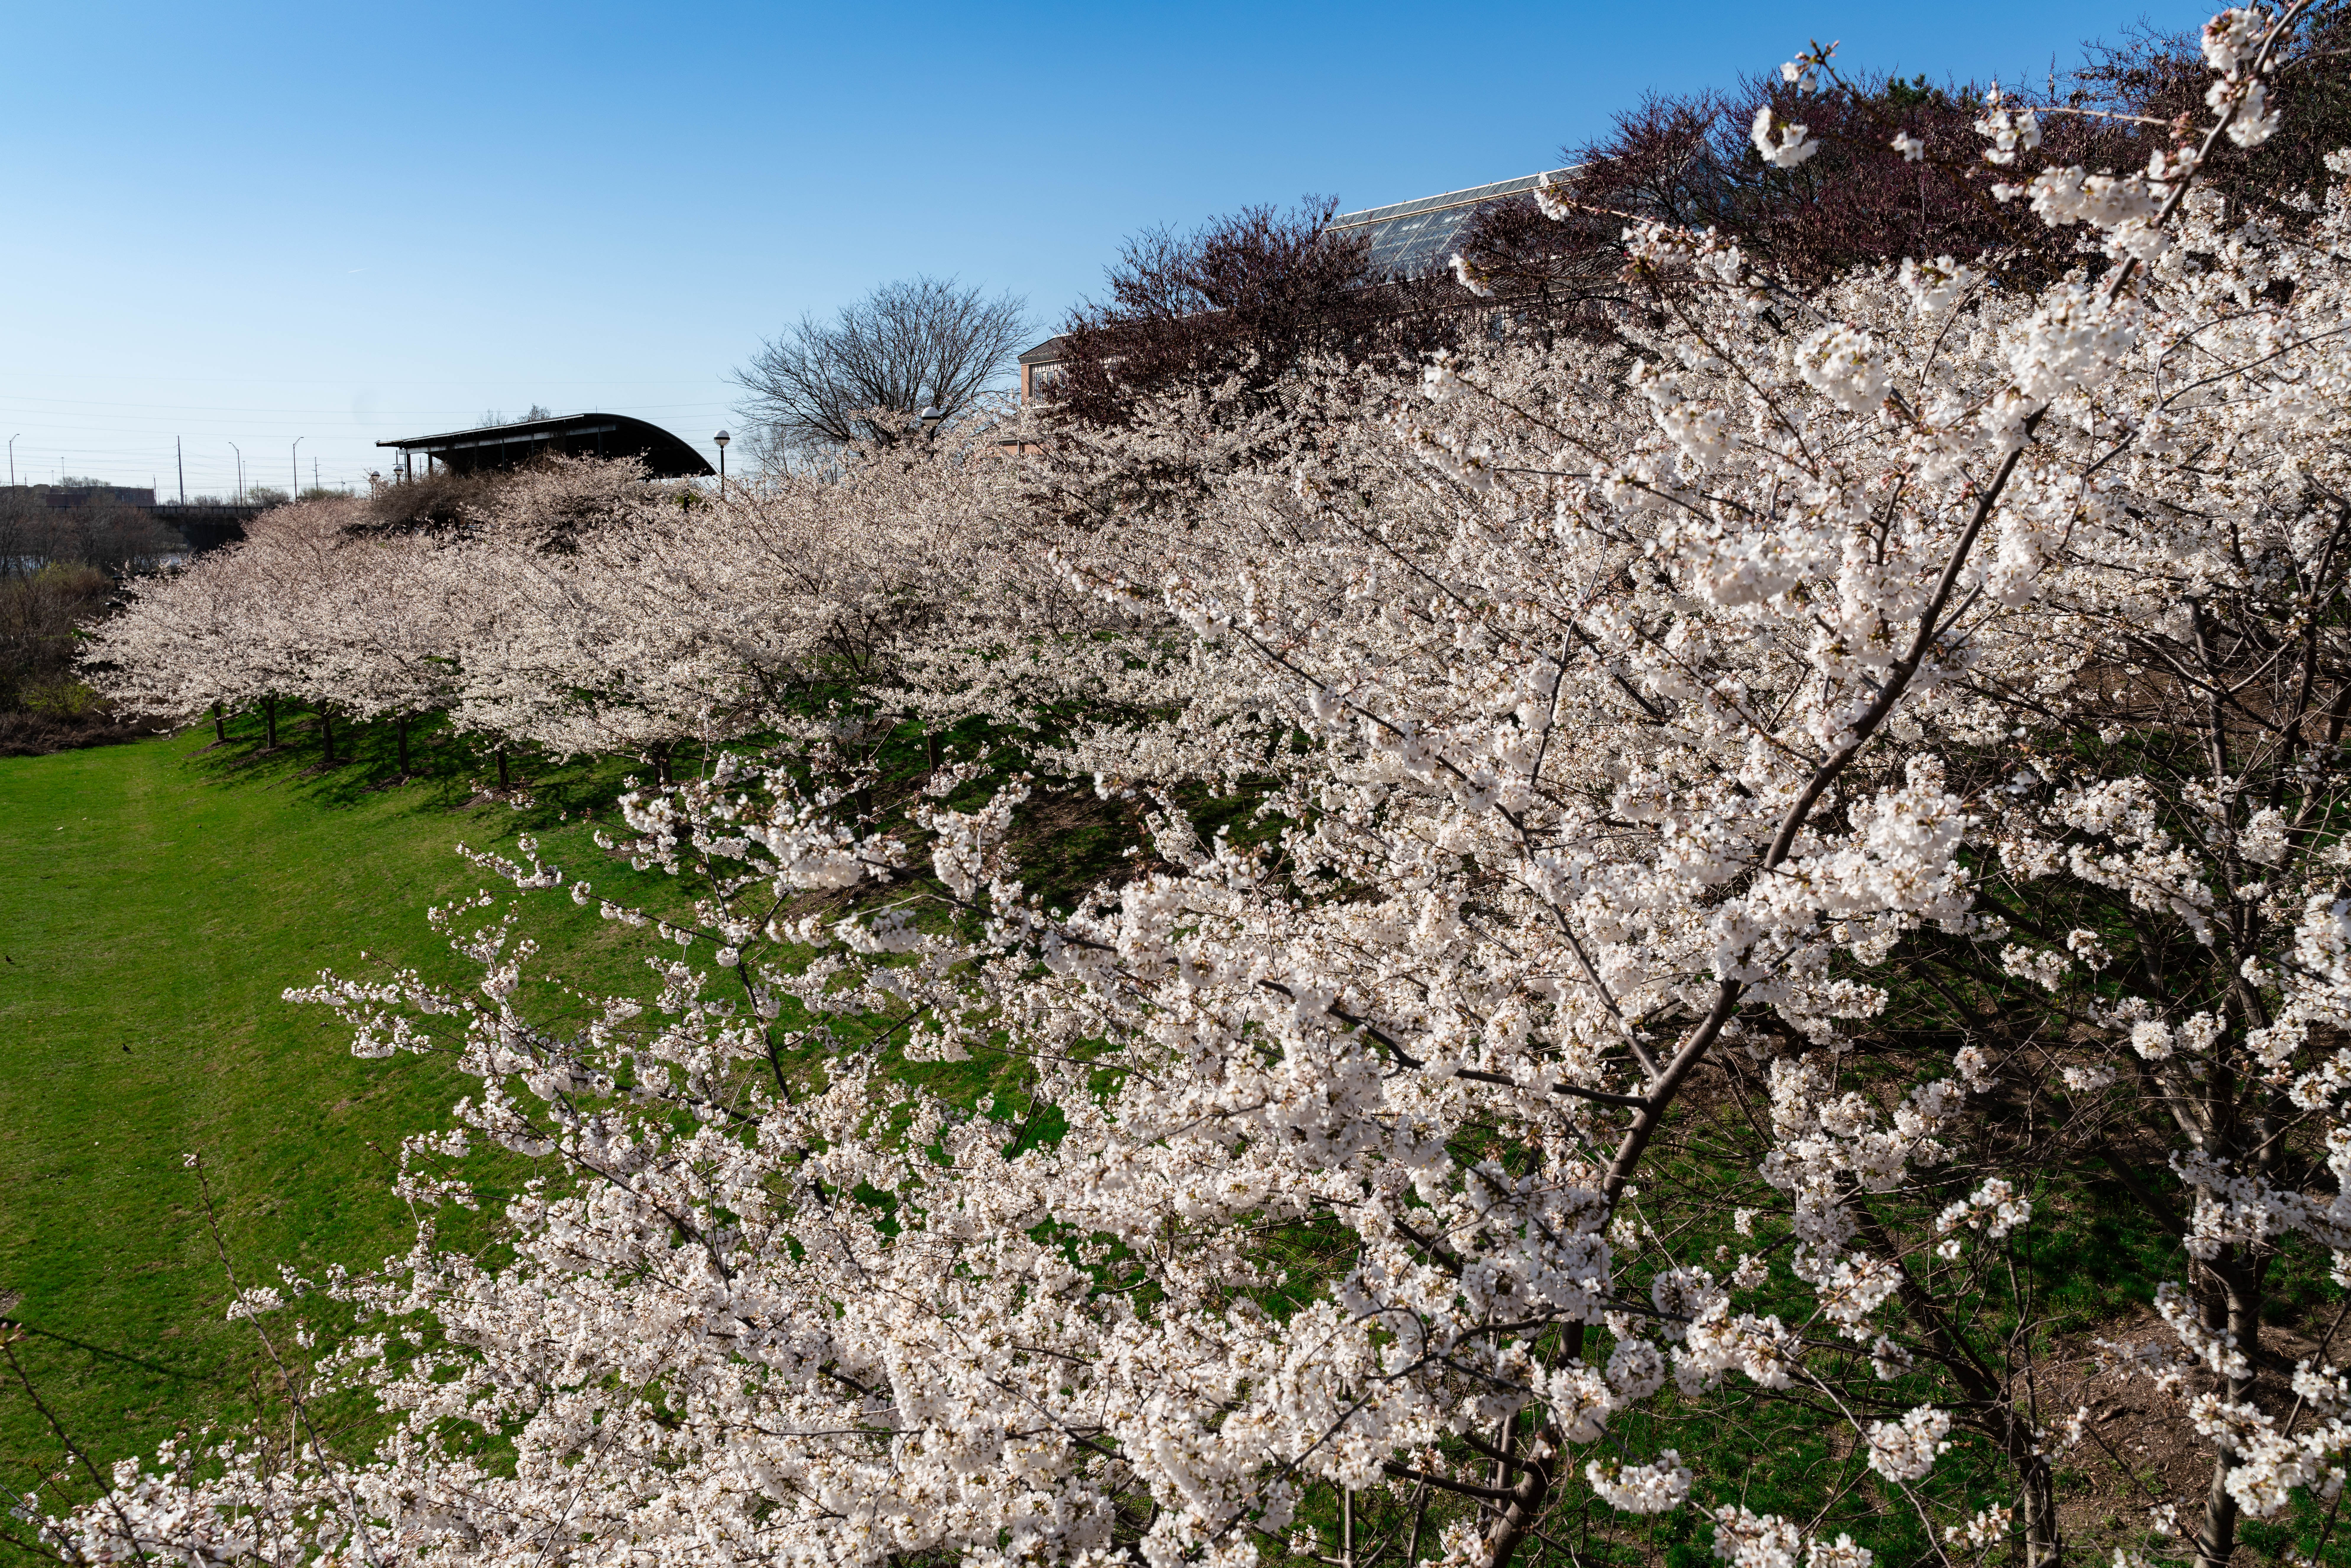 The Japanese Yoshino cherry blossom trees are blooming in White River State Park, signaling spring’s arrival.